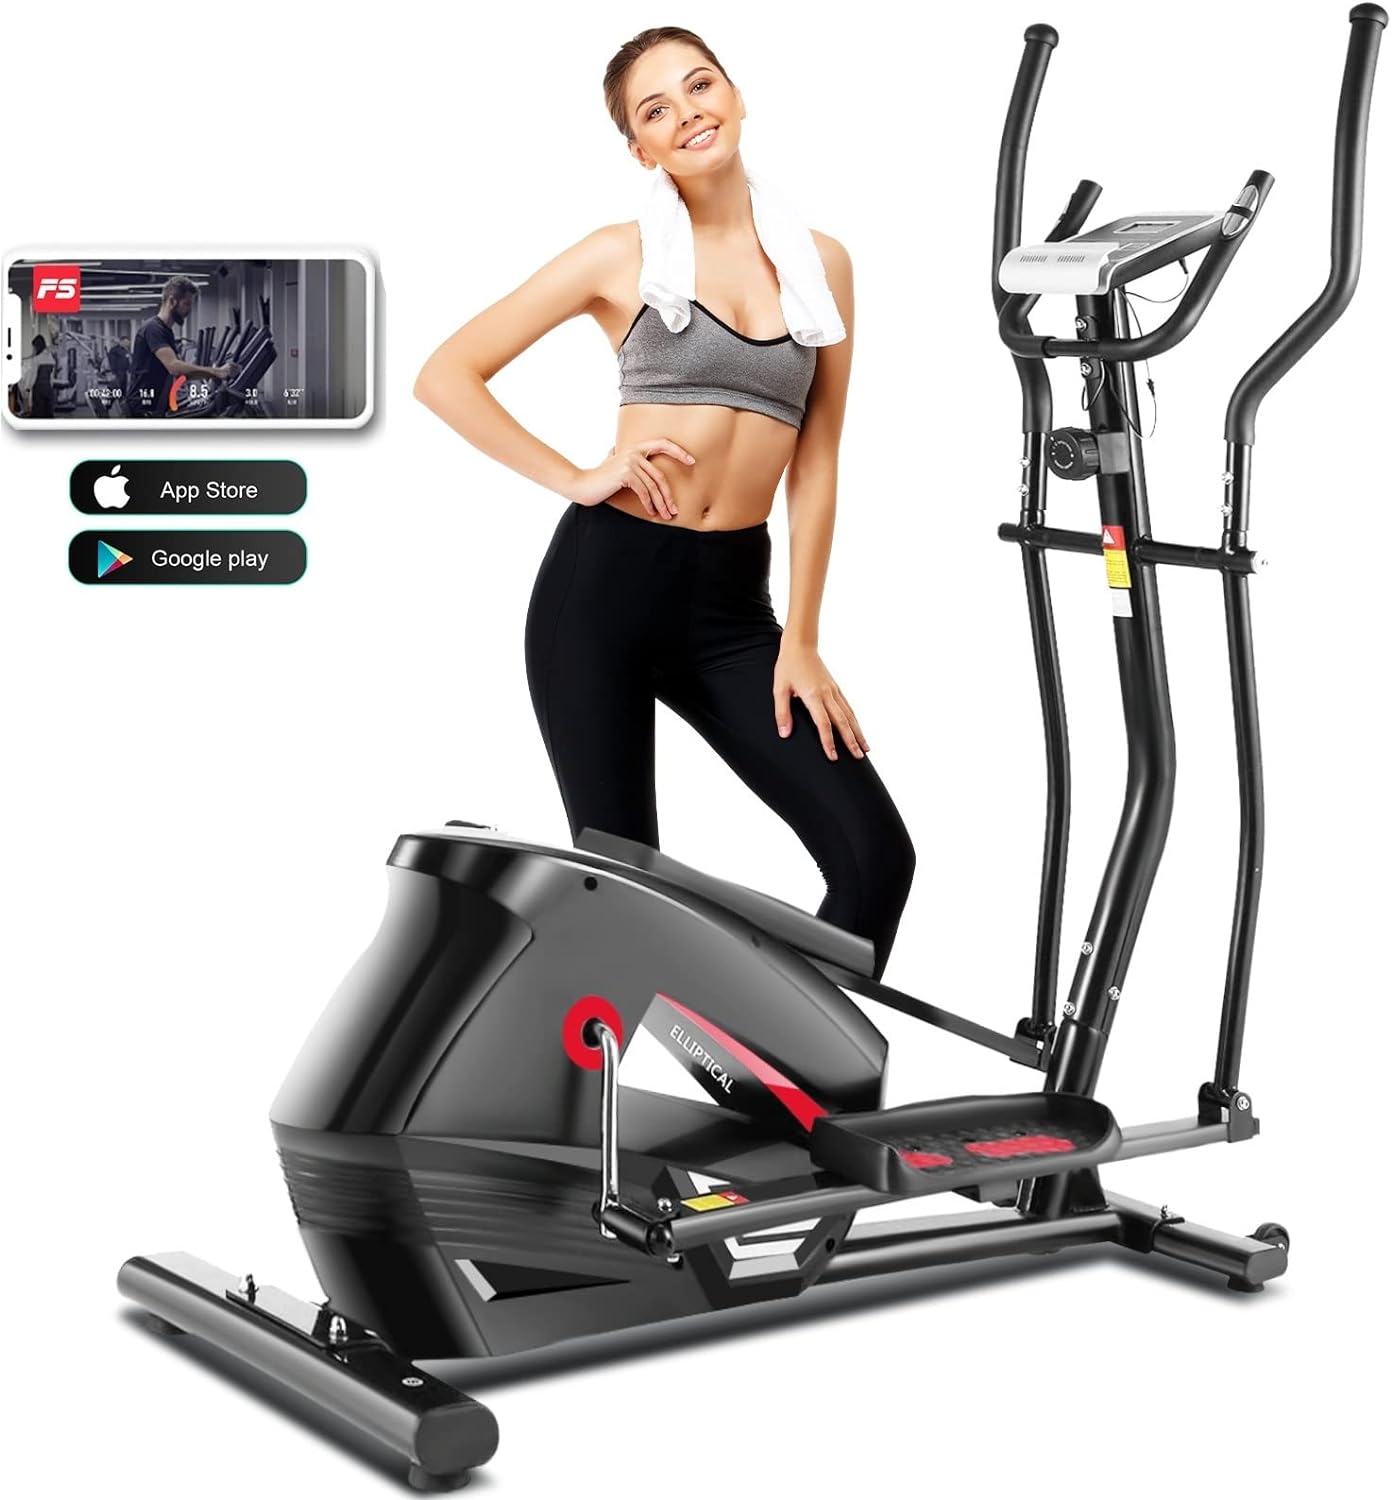 ANCHEER Magnetic Elliptical Machine Indoor Exercise Fitness Training Cardio Gym! 